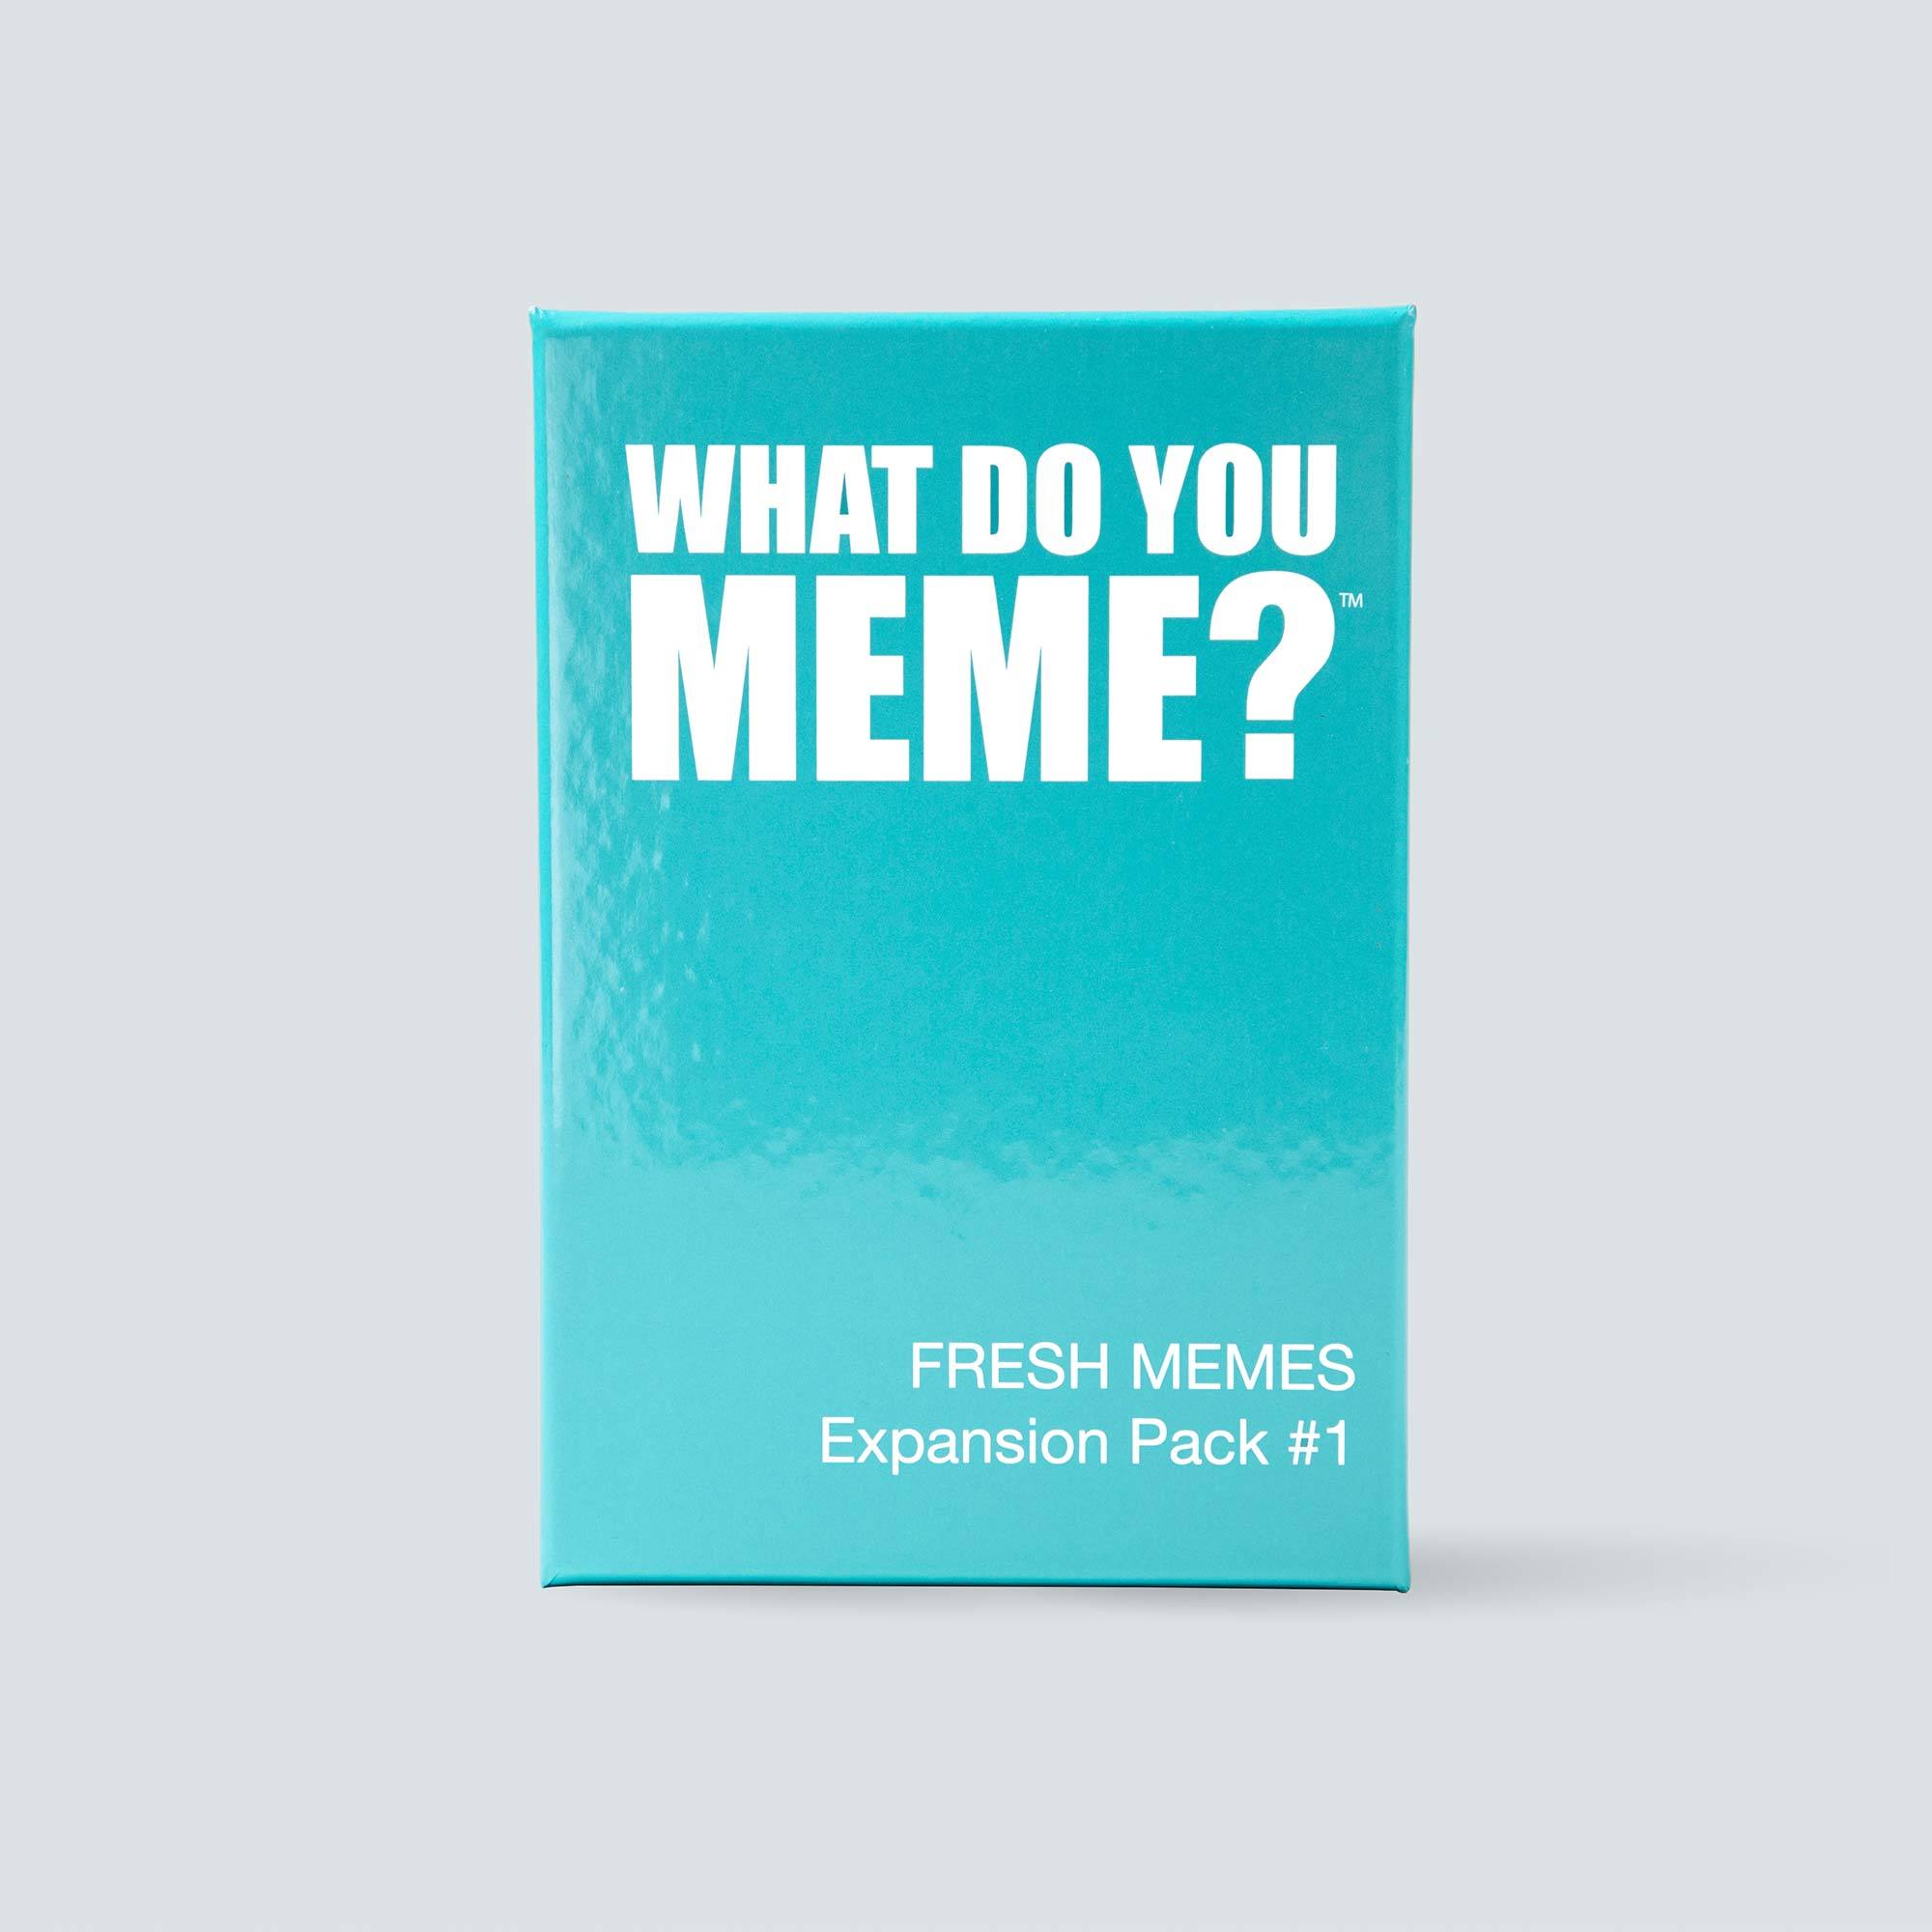 fresh-memes-expansion-pack-game-box-and-game-play-03-what-do-you-meme-by-relatable